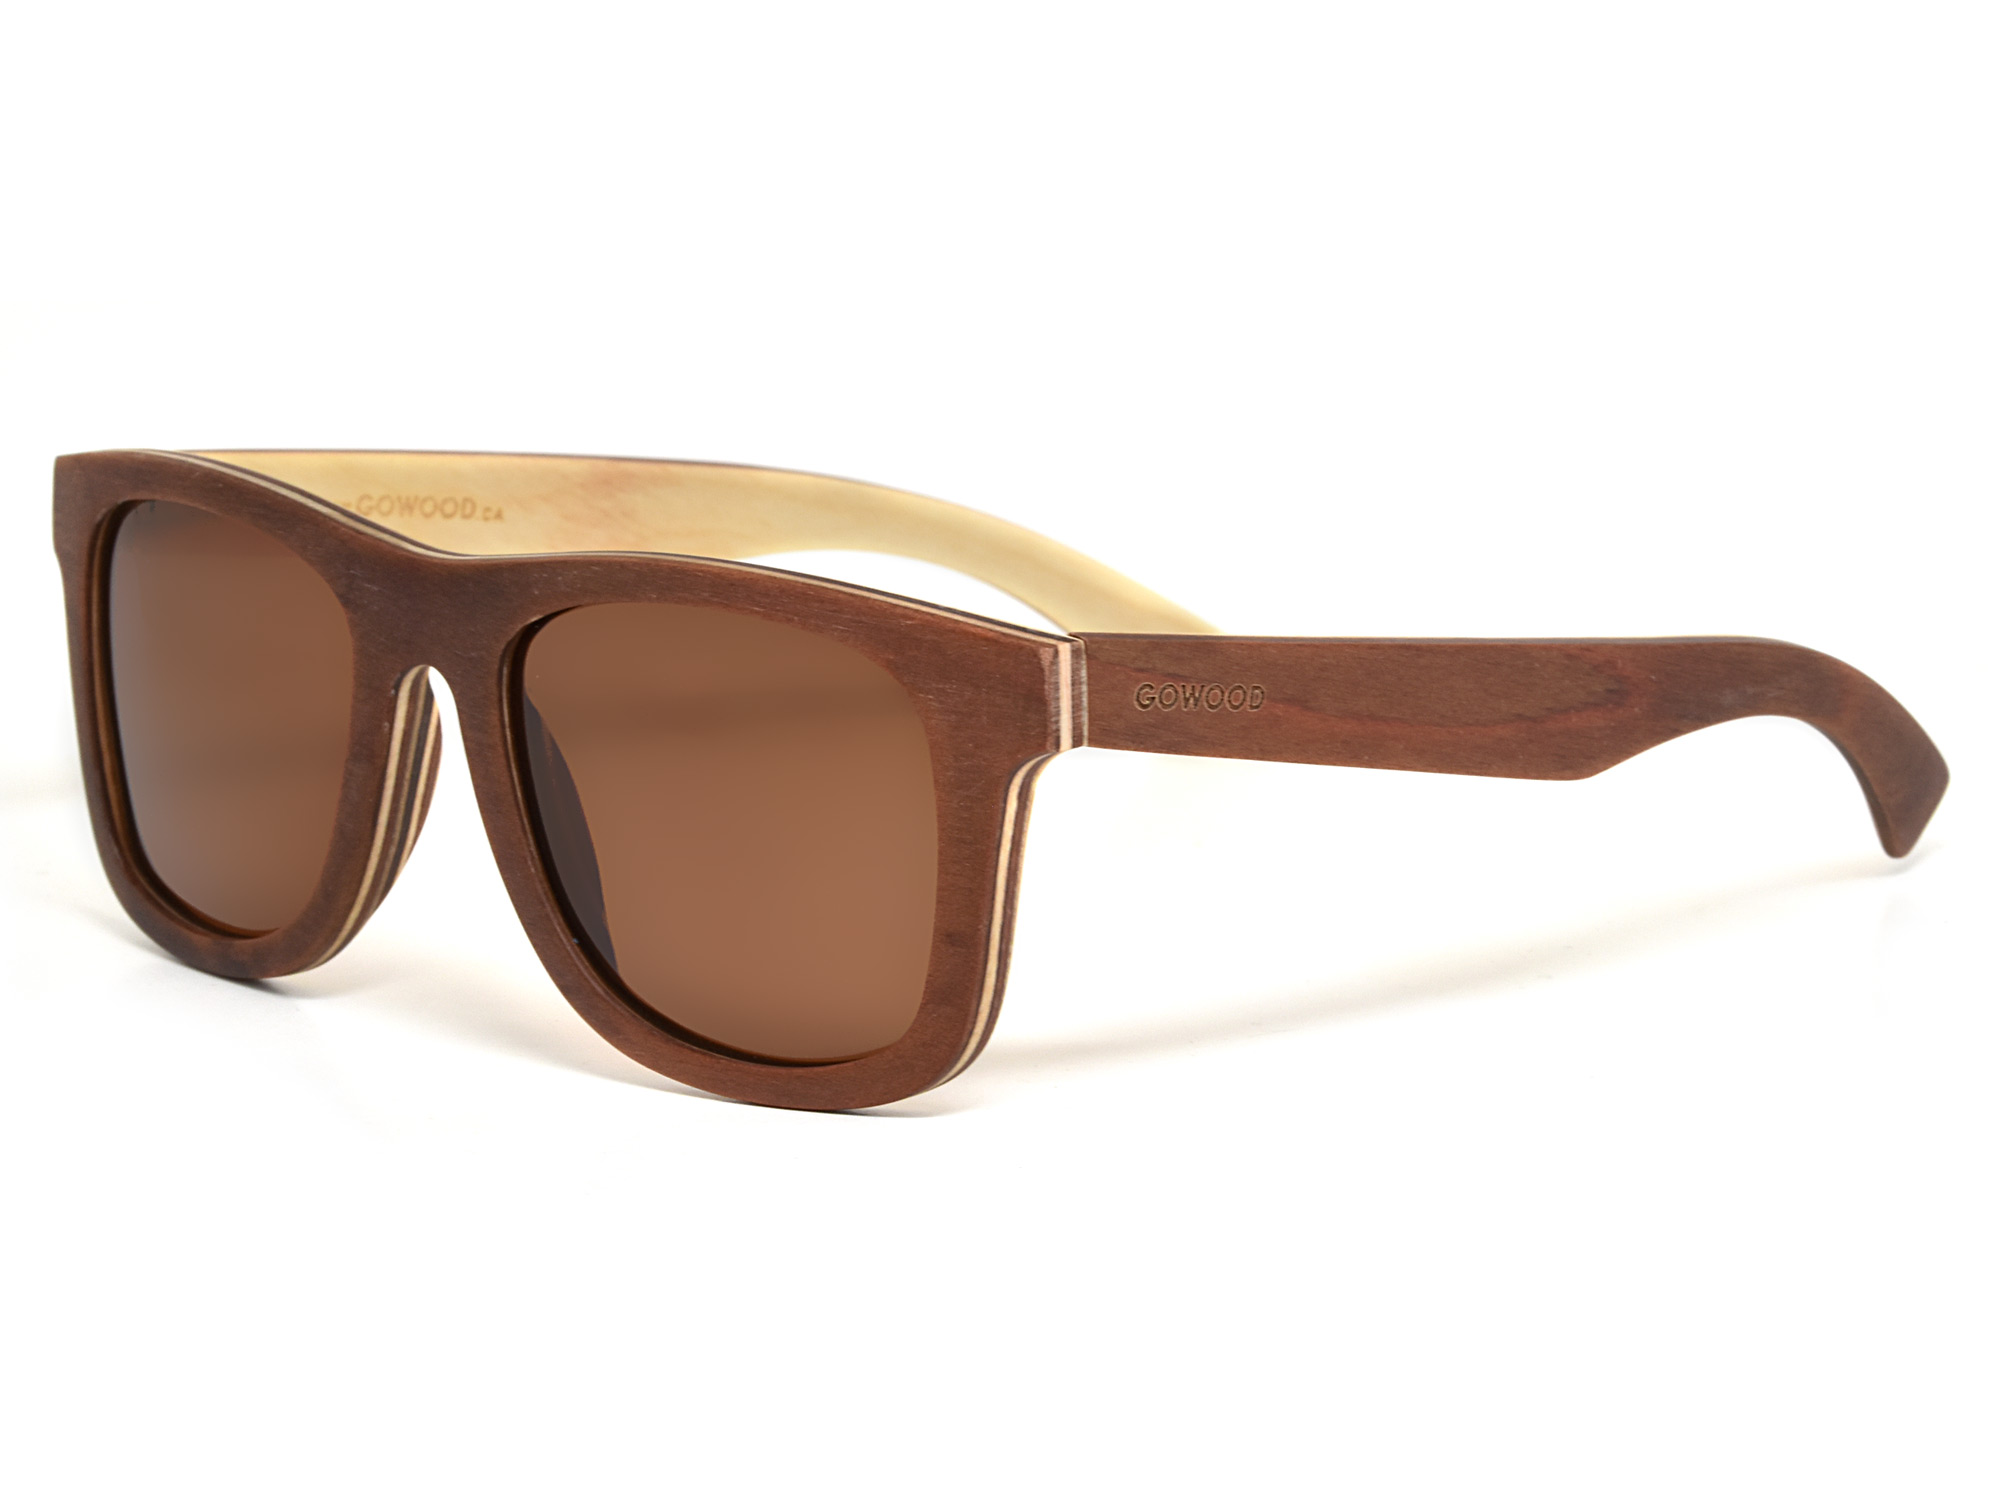 Maple wood sunglasses with brown polarized lenses